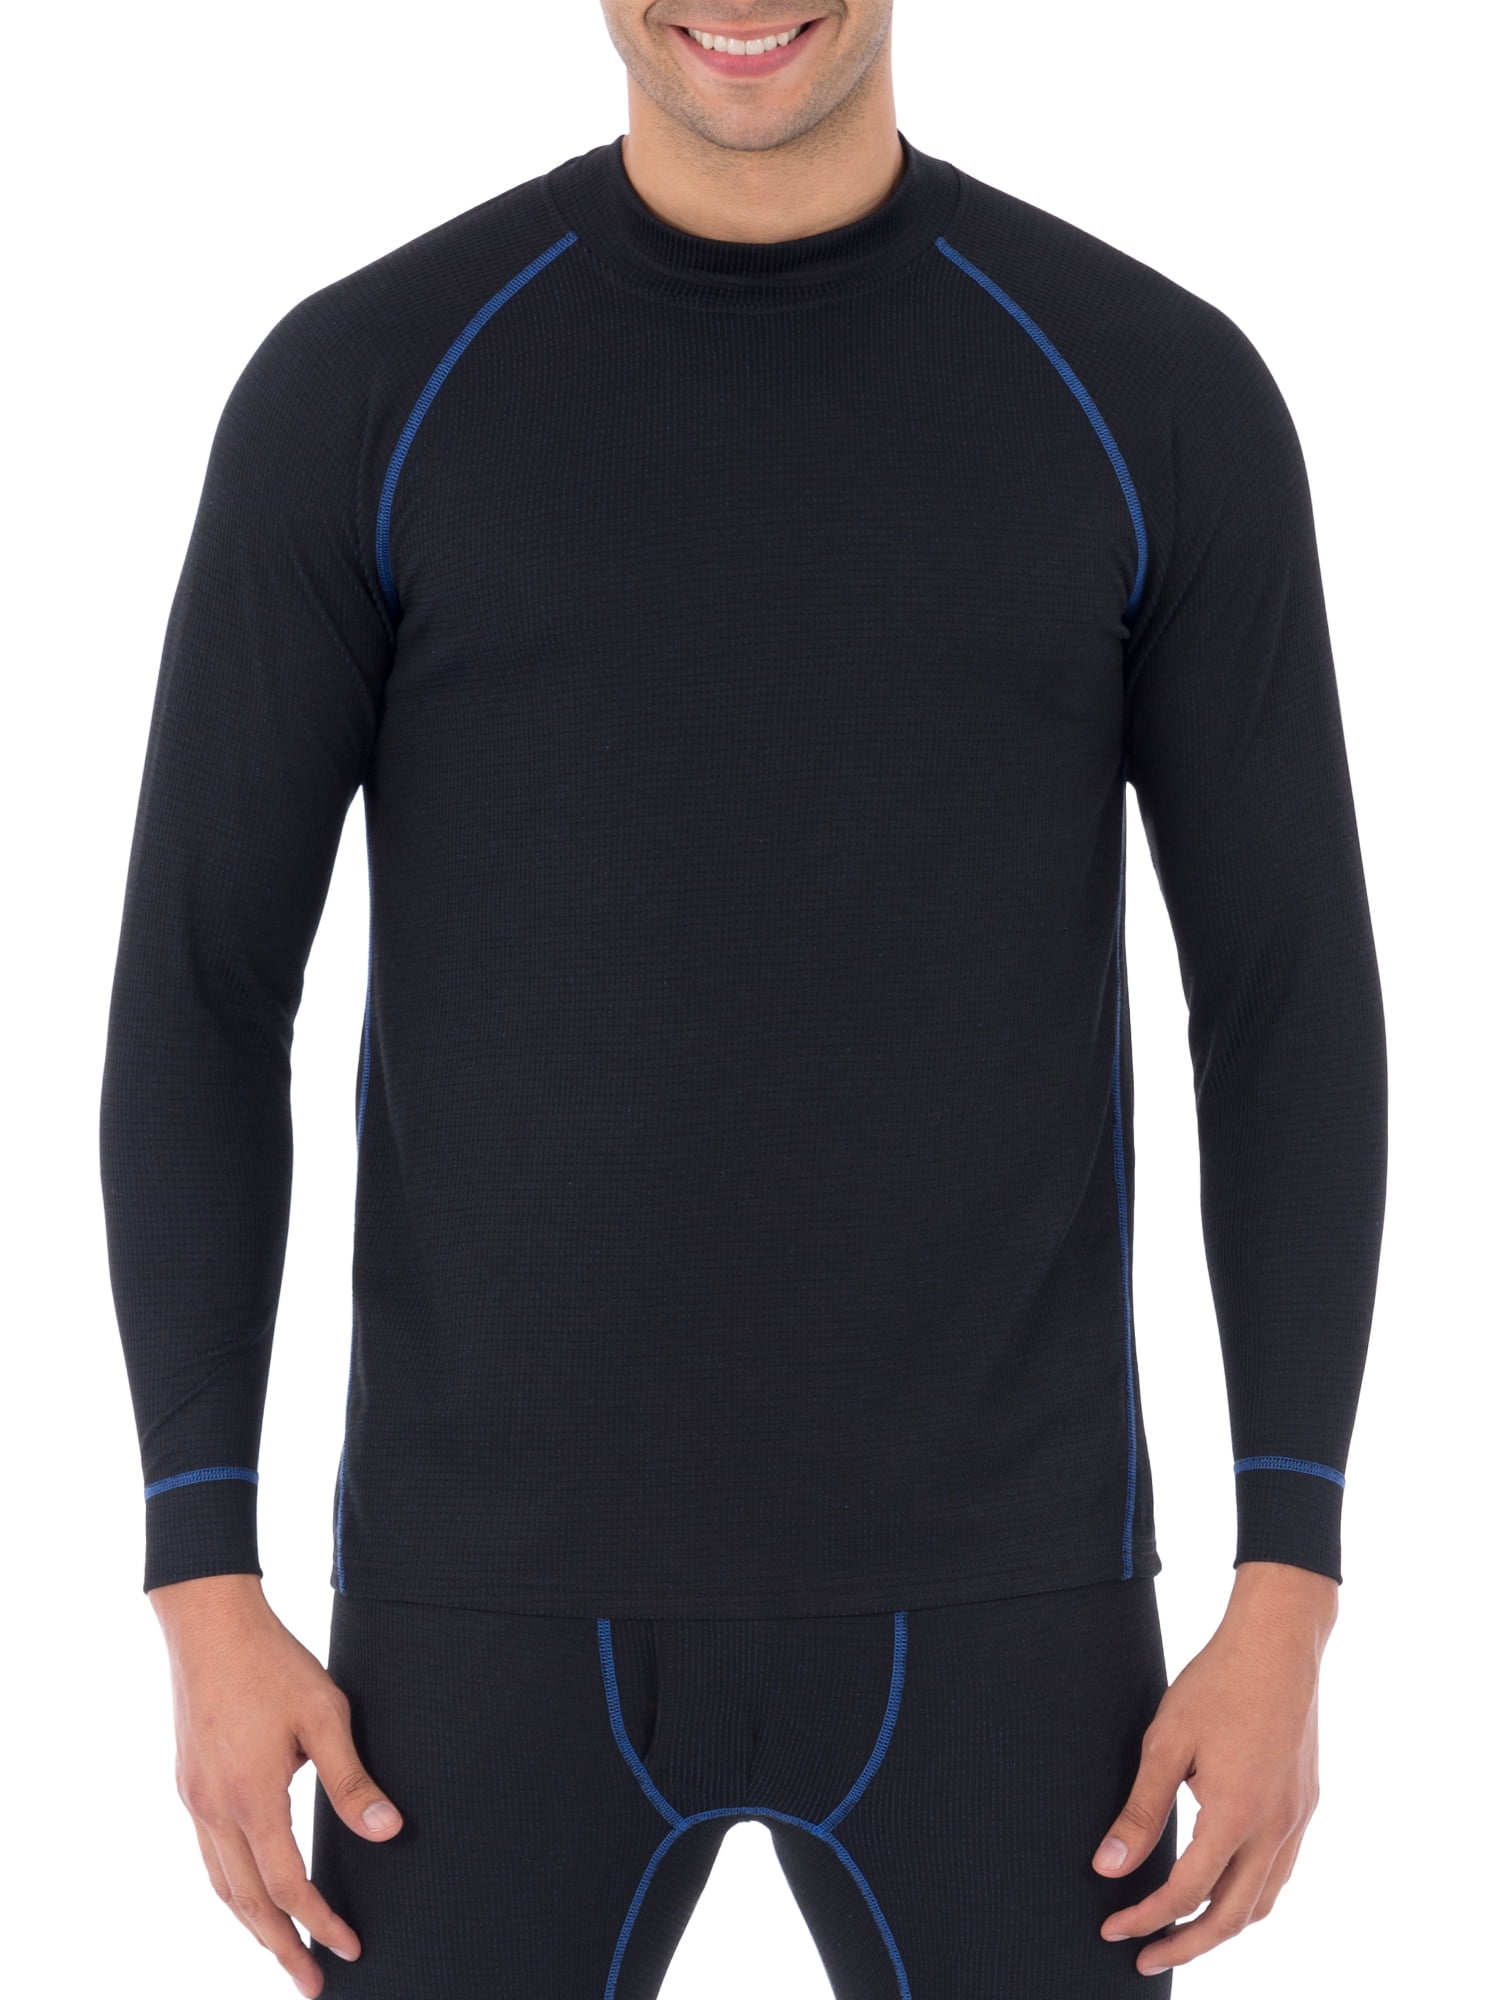 Click Mens Black Thermal Base Layer Long Sleeve Vest Top Compression Winter Warm 